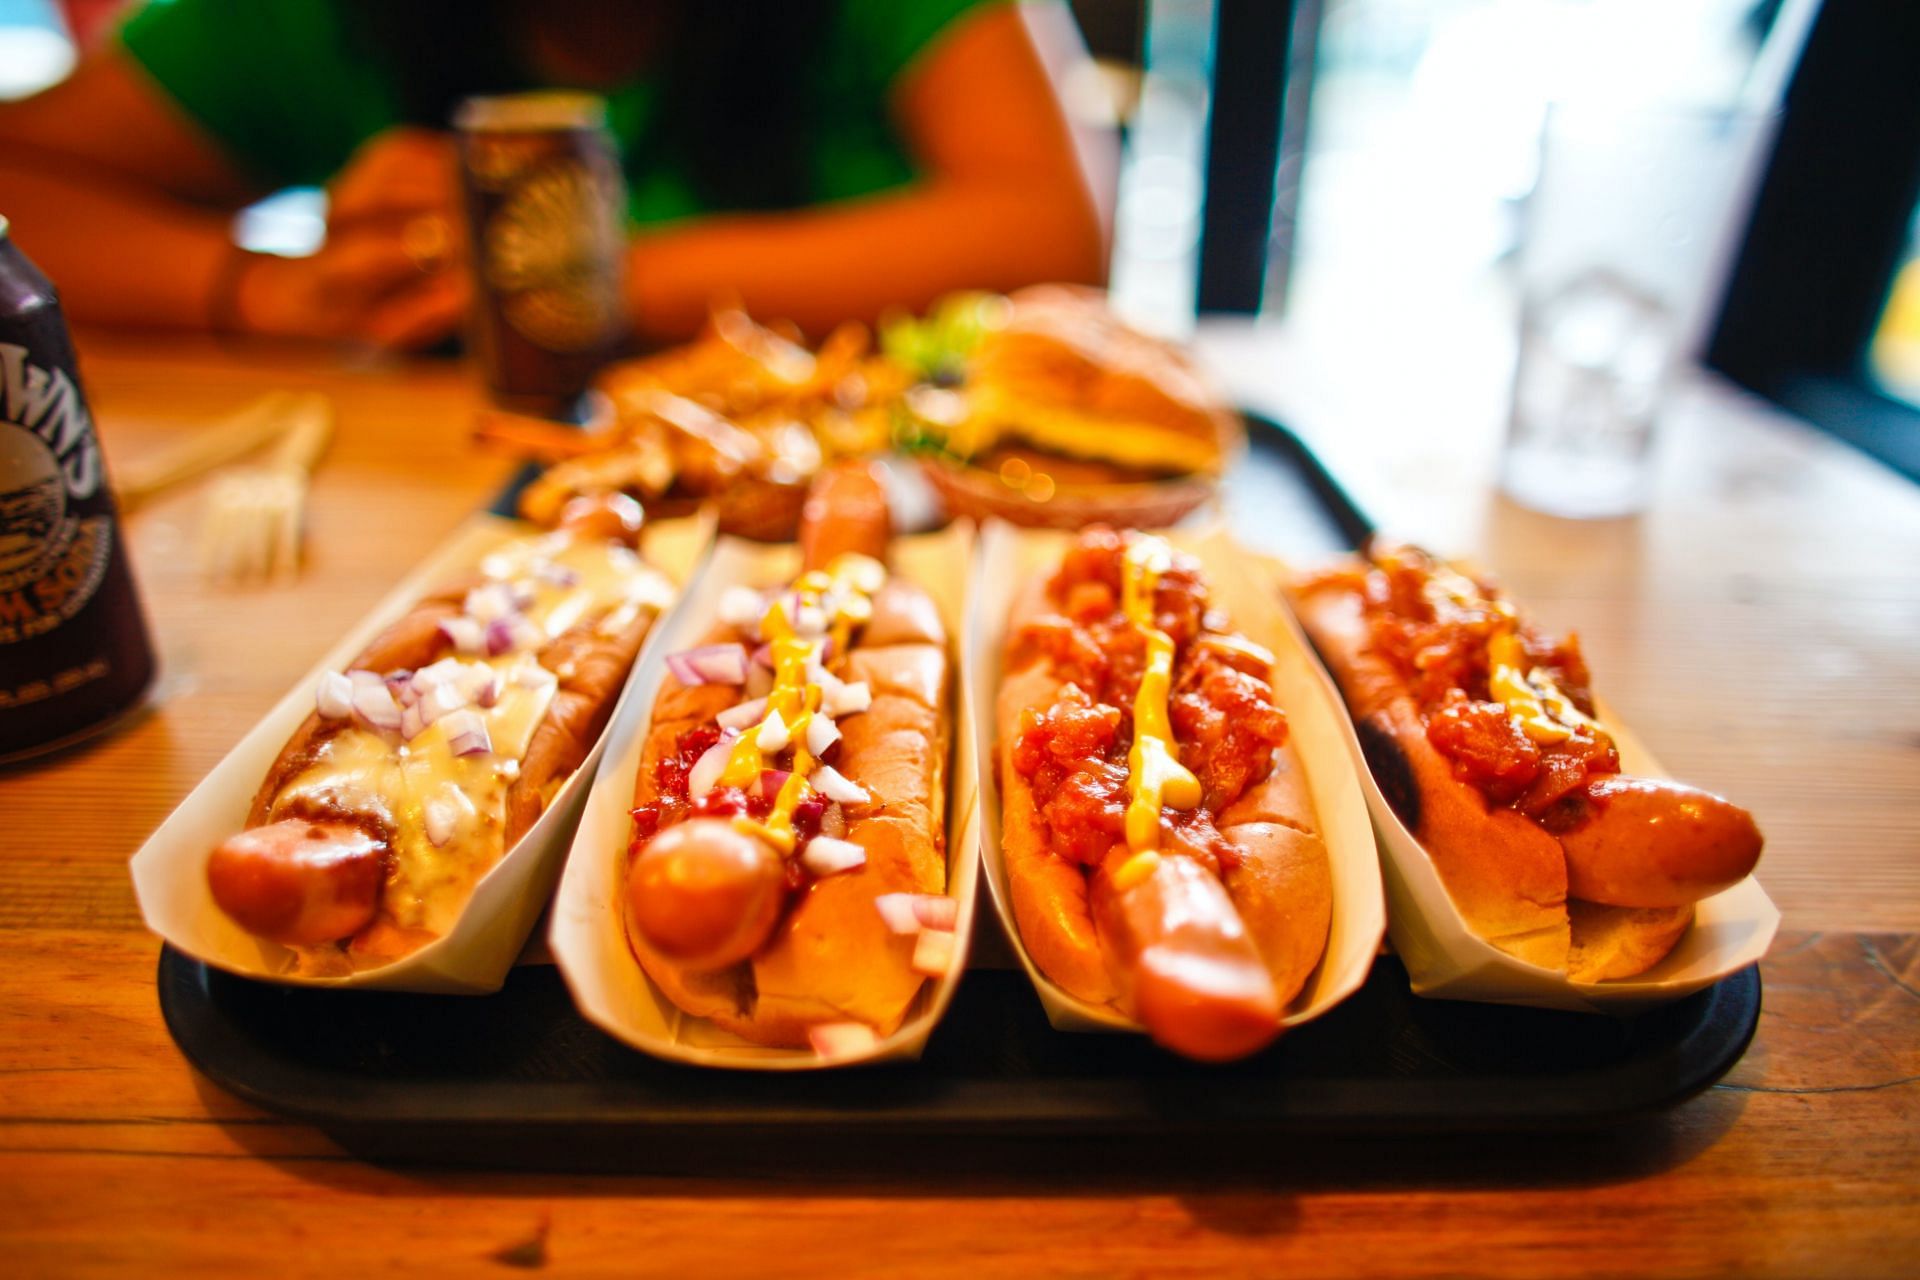 Hotdogs as one of the worst foods for inflammation (image sourced via Pexels / Photo by Caleb)